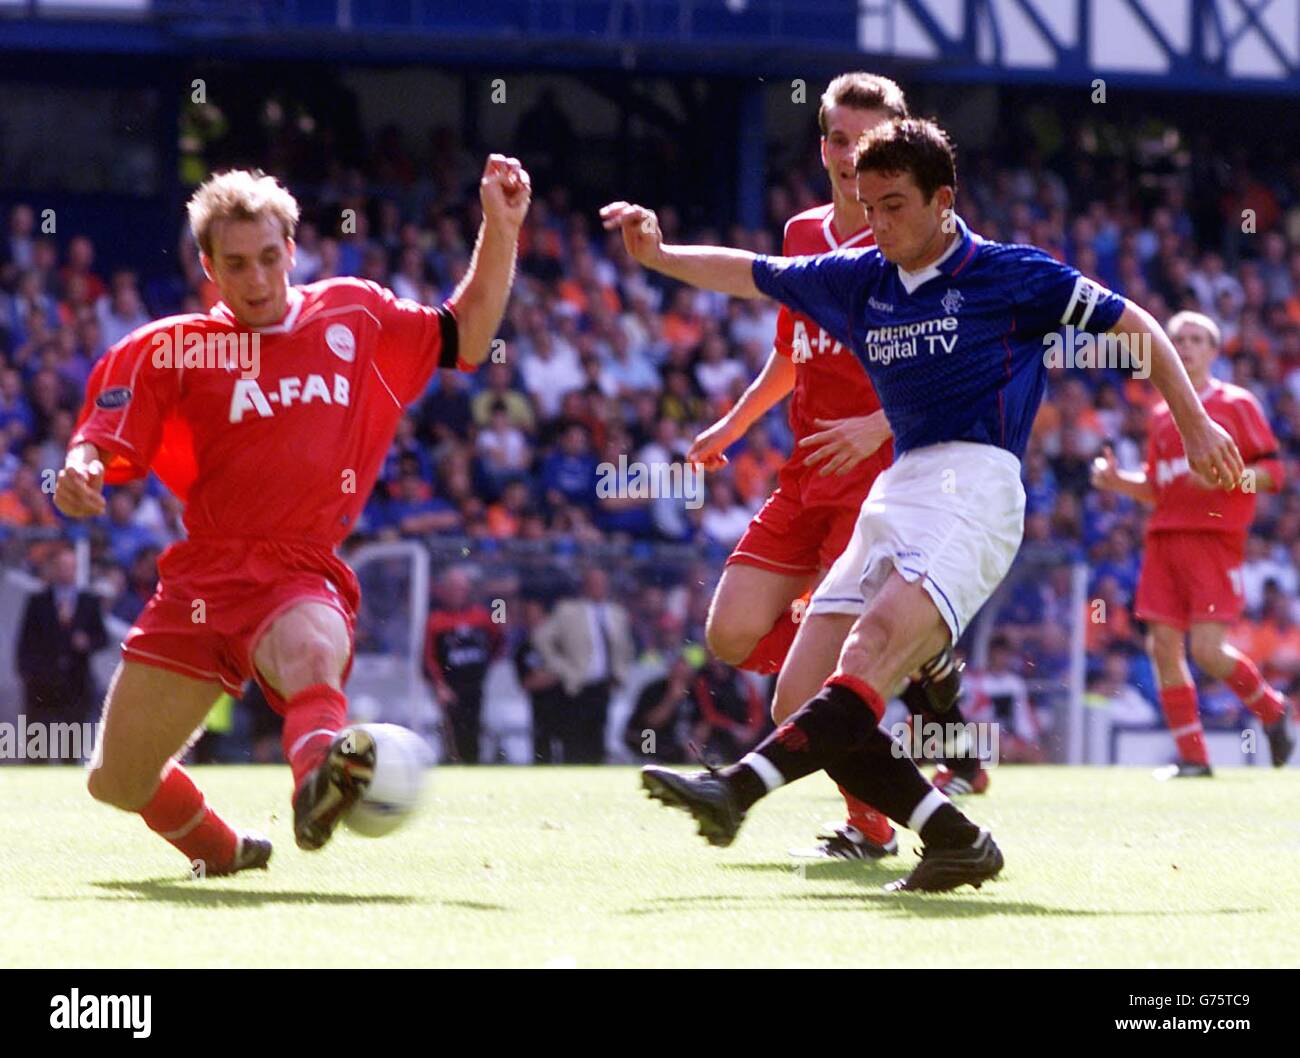 Barry Ferguson of Rangers' (right) shot is blocked by Aberdeen's Russell Anderson (left) during their Bank of Scotland Premier League match at Rangers' Ibrox Stadium in Glasgow, Rangers 2 Aberdeen 0. Stock Photo